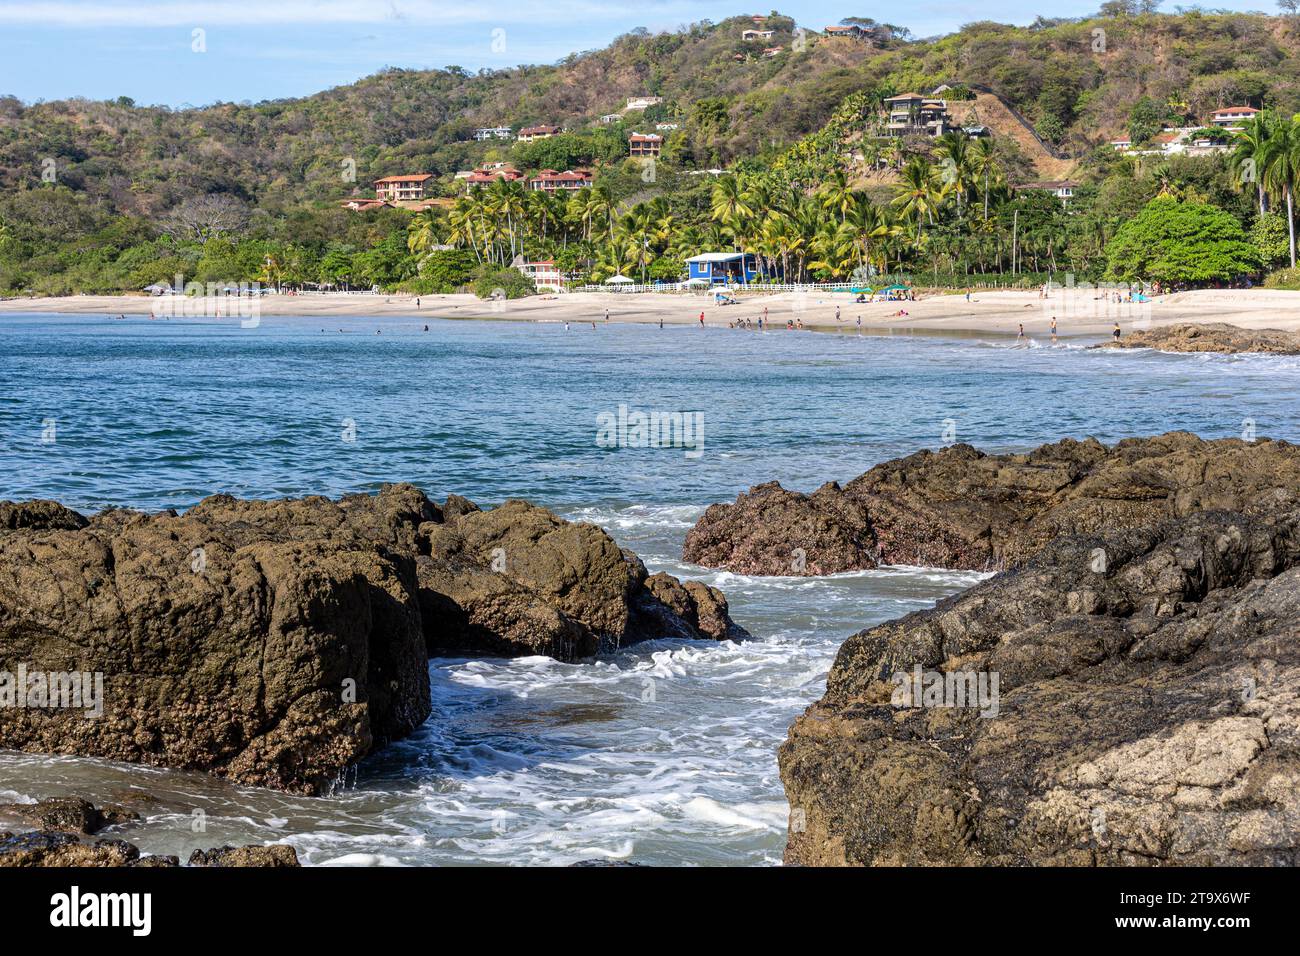 Playa Penca, Costa Rica - January 15, 2023: A general view of Playa Penca with rocks in the foreground.  Playa Penca is a little known but beautiful b Stock Photo